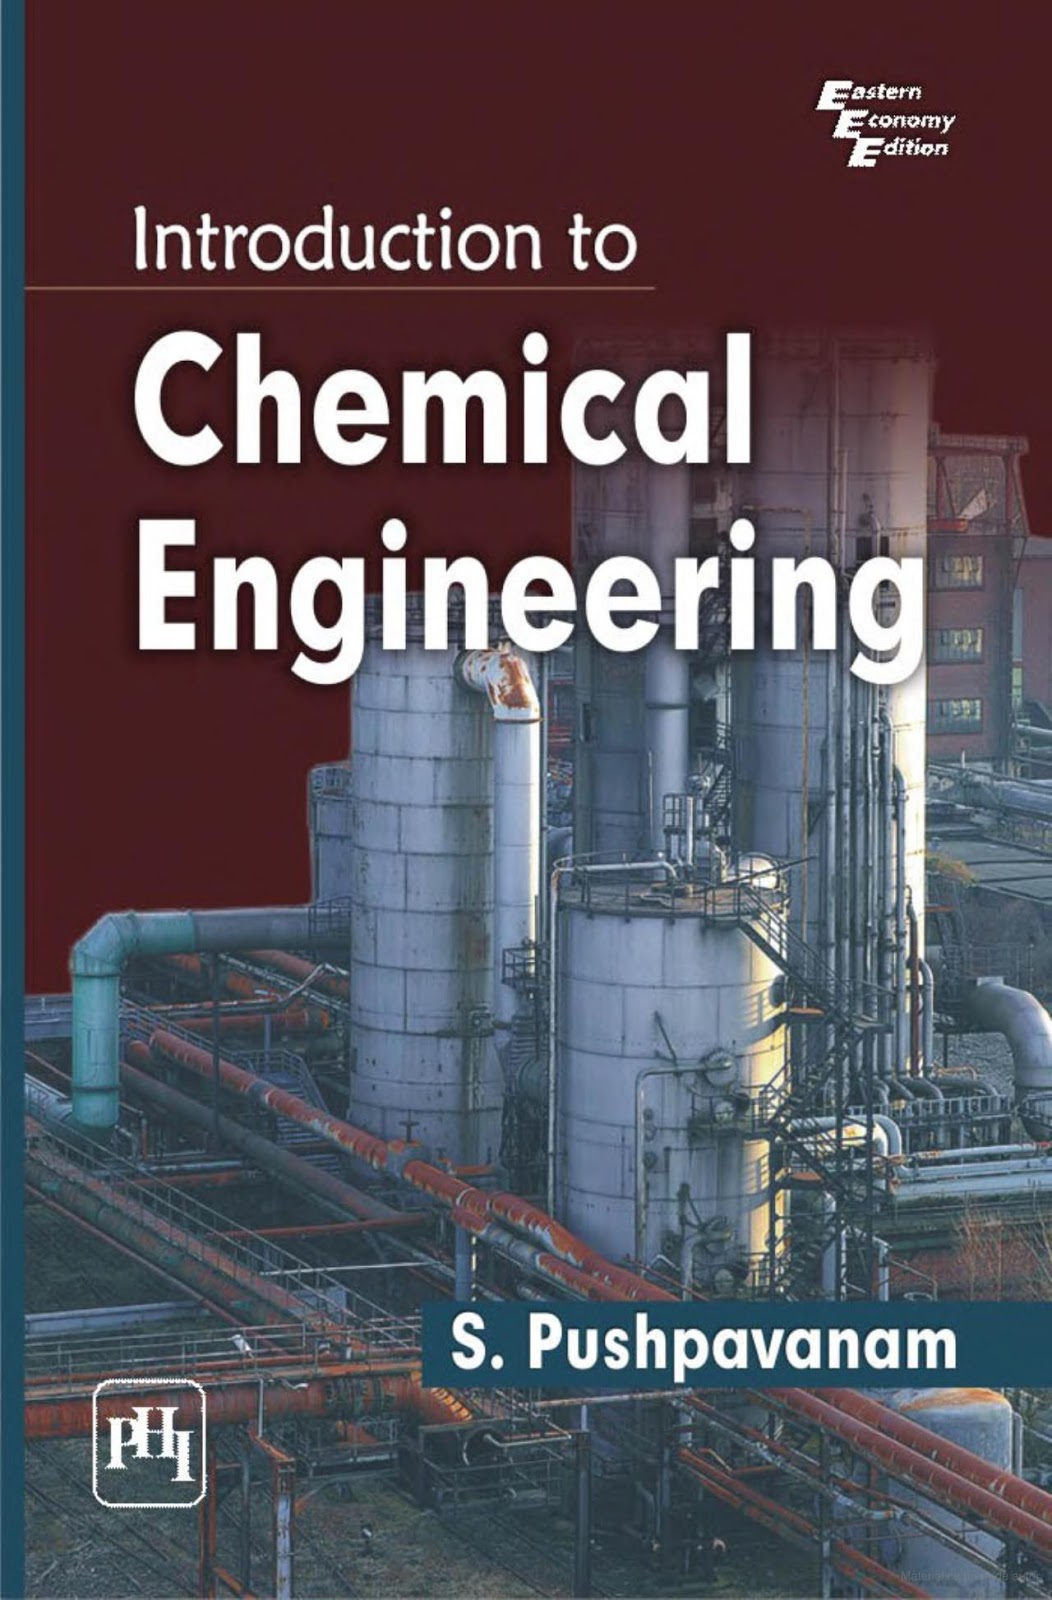 Engineering Library Ebooks: Introduction to Chemical Engineering